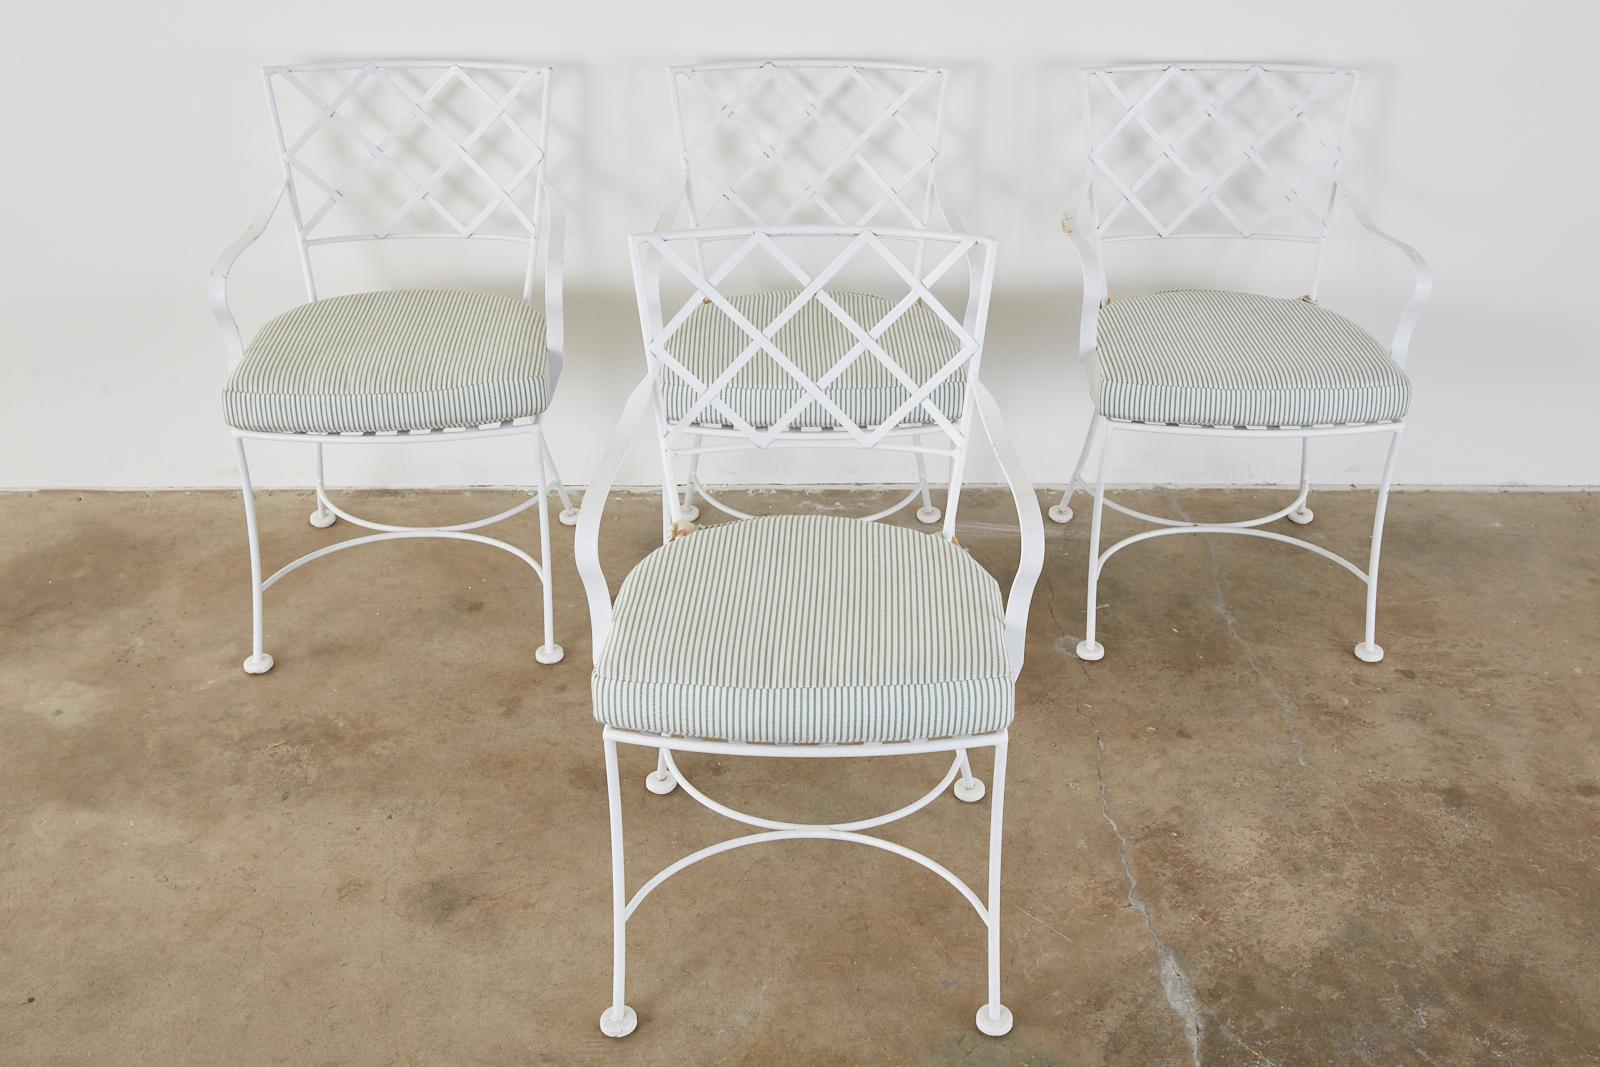 20th Century Set of Four Neoclassical Style Iron Garden Dining Chairs